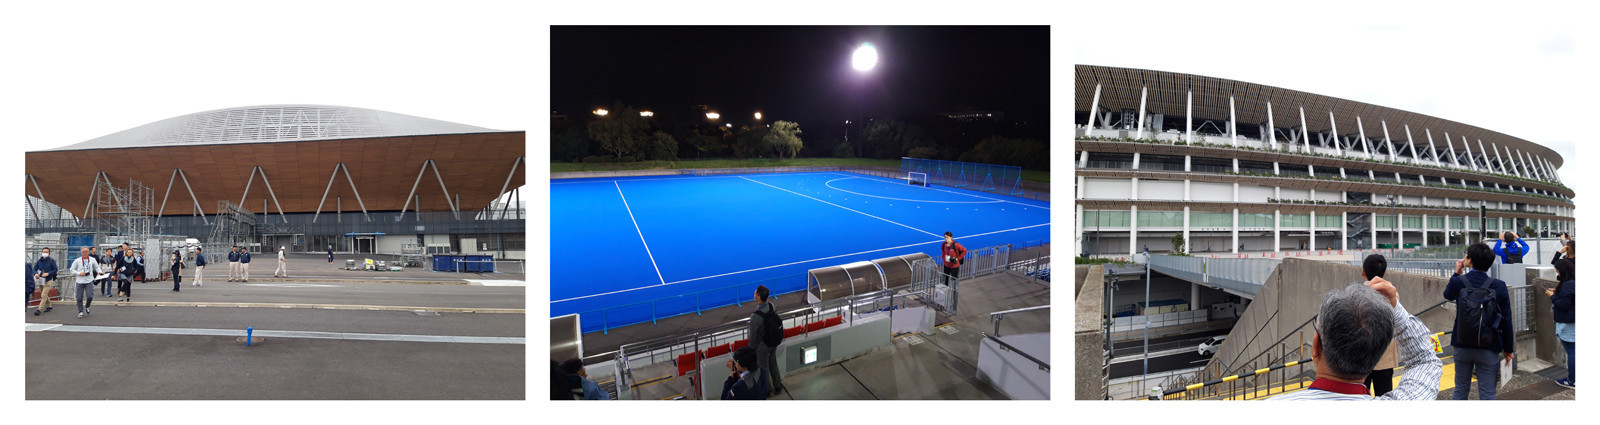 Updates were provided on construction at Ariake Gymnastics Centre, Oi Hockey Stadium and the Olympic New National Stadium during the venue tours ©ITG 